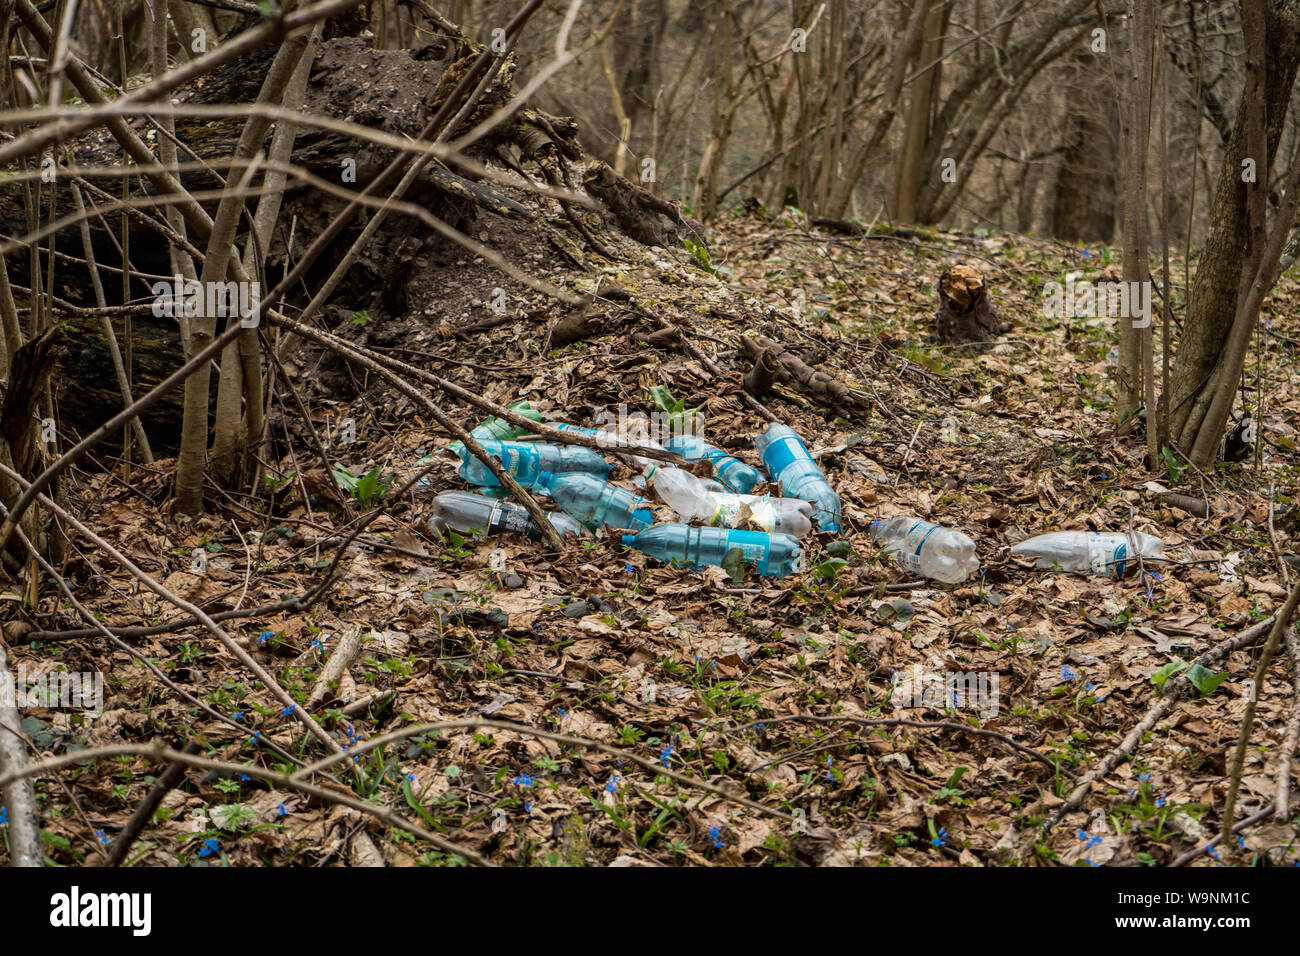 flooded by plastic bottles place in wild forest near the nature spring water source Stock Photo